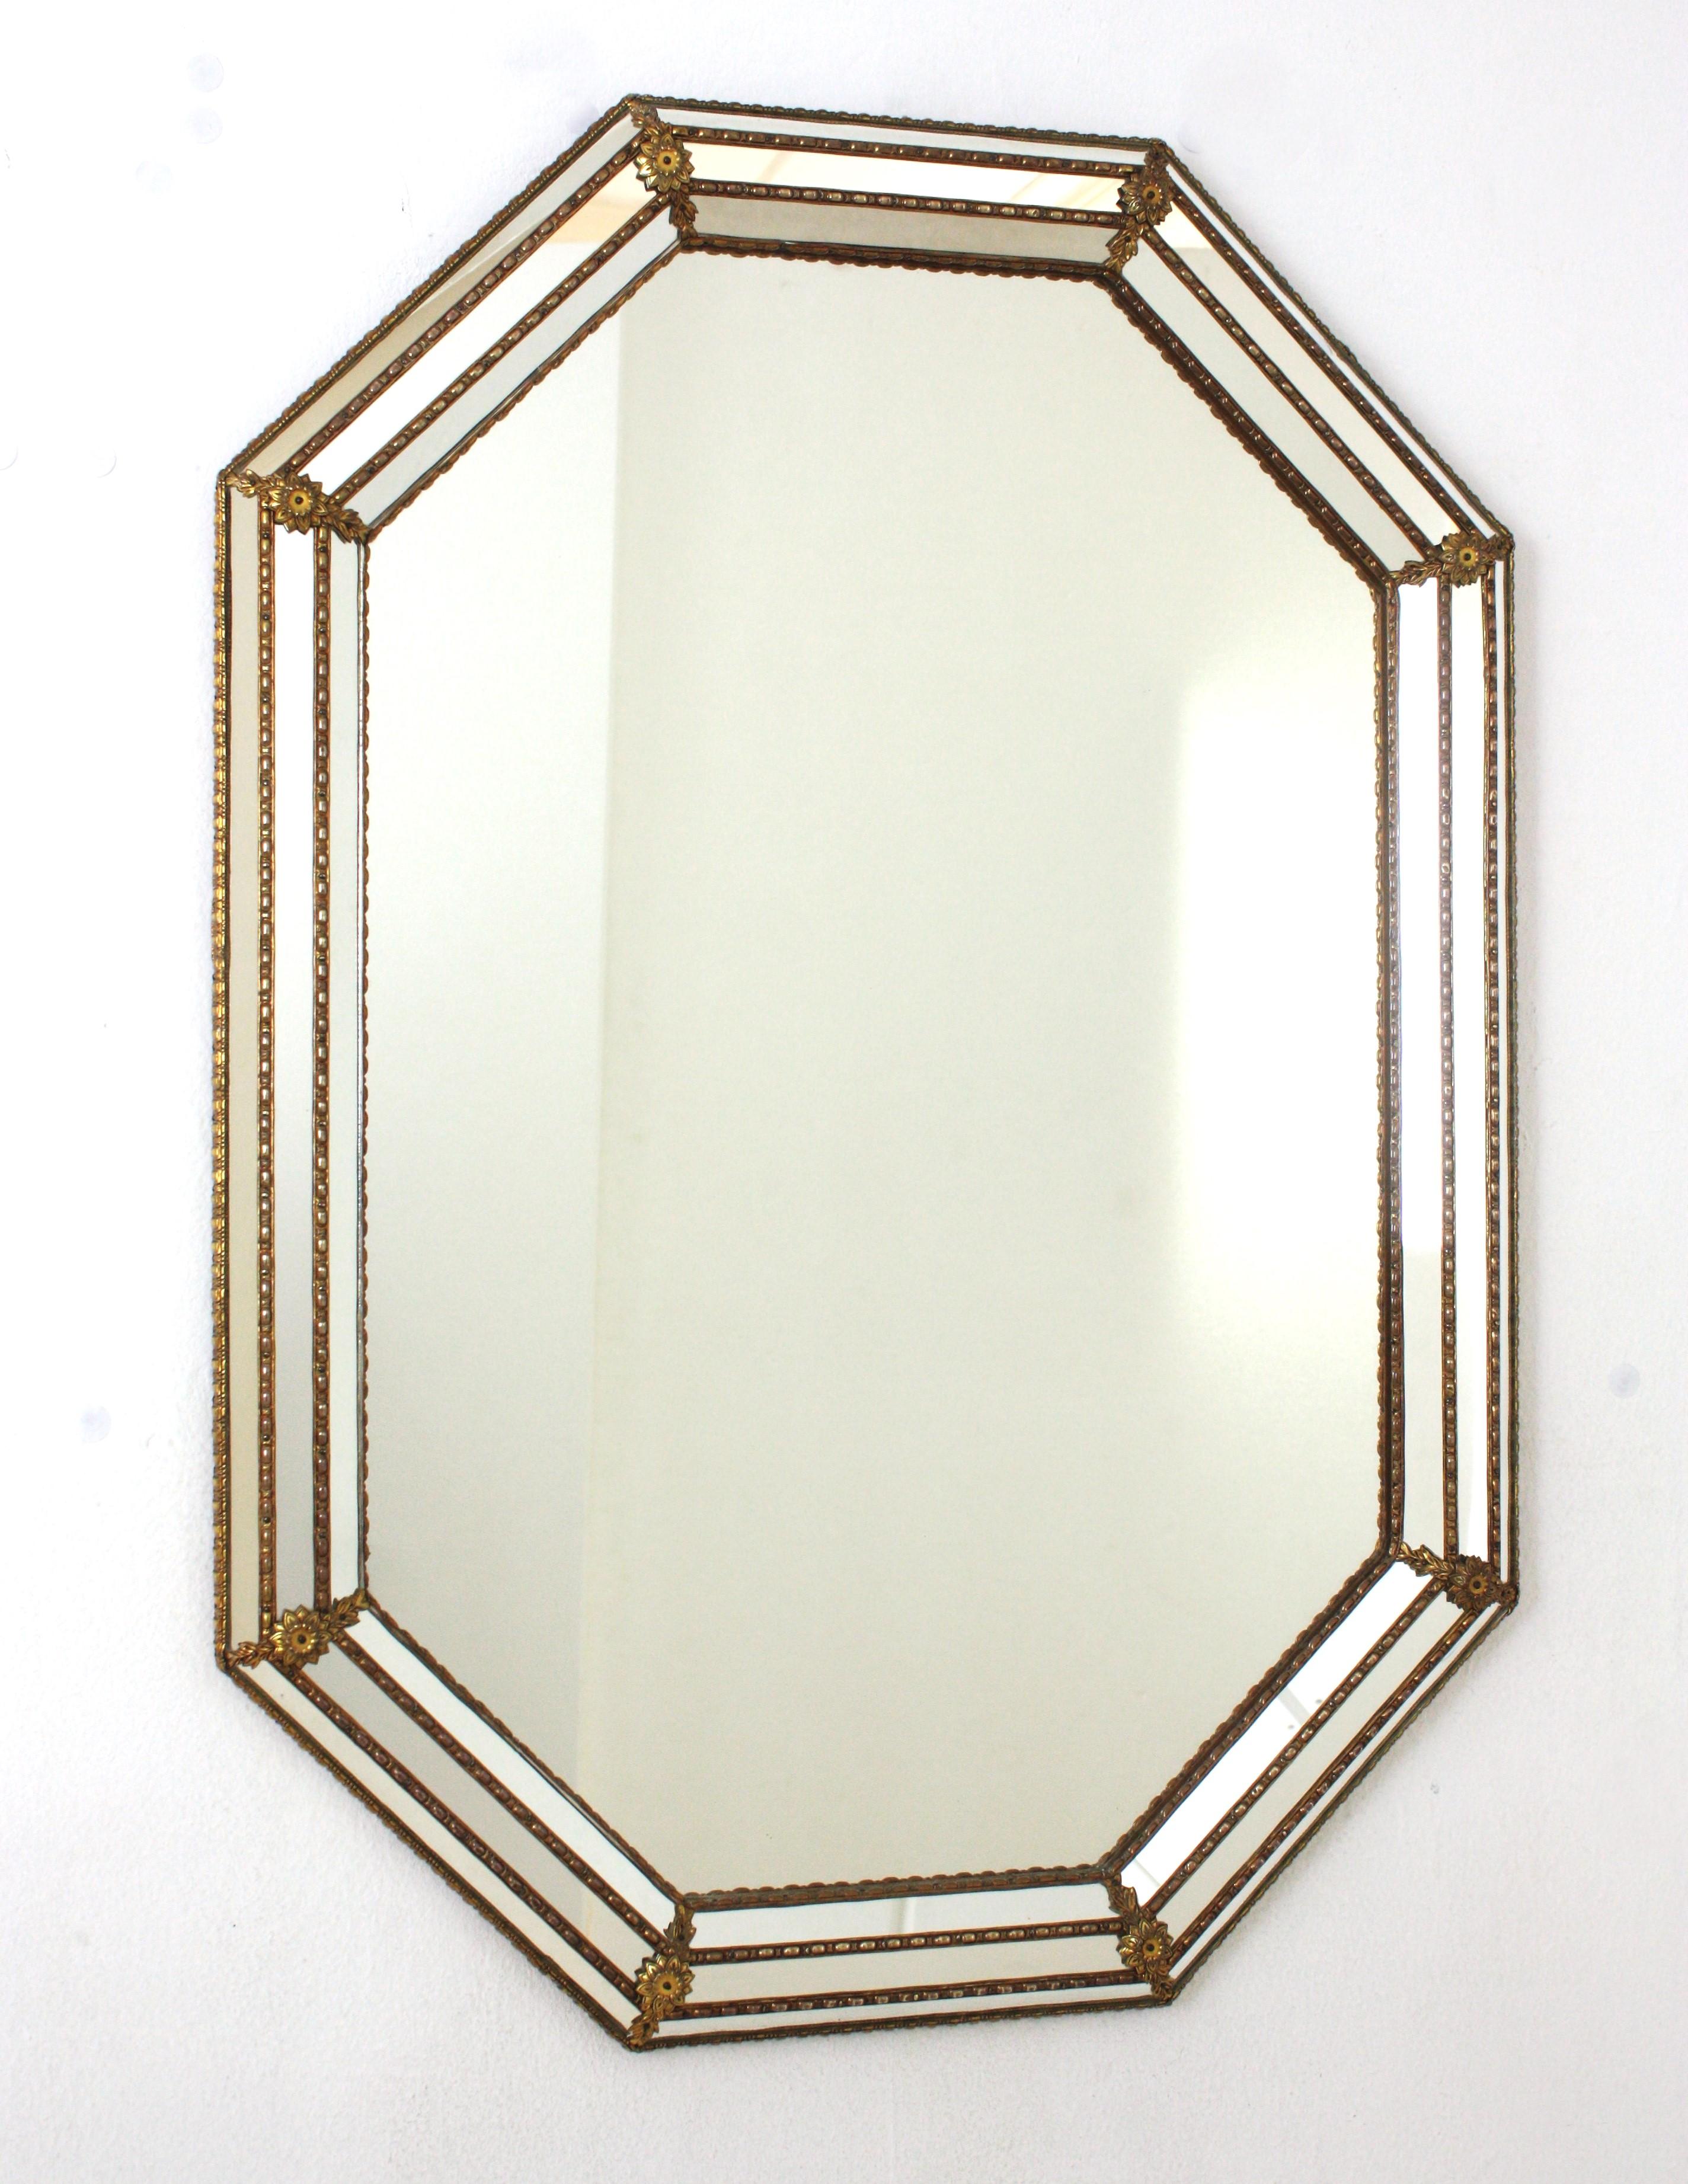 Venetian Modern Octagonal Wall Mirror with Brass Frame
Venetian style octagonal wall mirror with gilt metal accents, Spain, 1960s
This octagonal mirror has a triple mirror frame. The mirrored panels are adorned by metal patterns and small